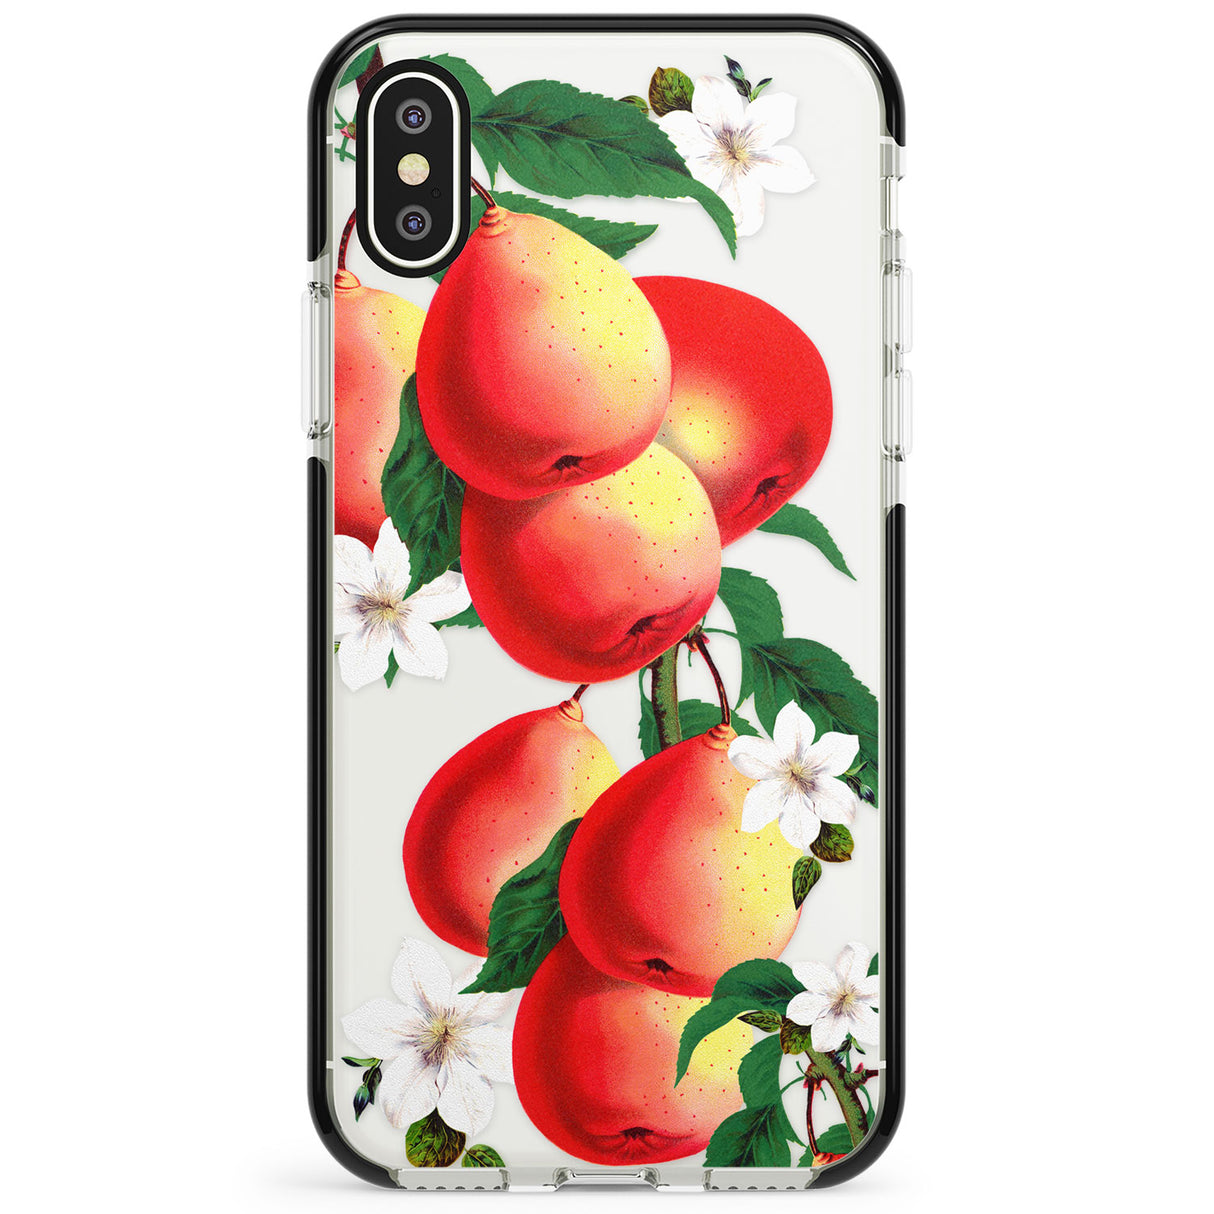 Vintage Painted Peaches Phone Case for iPhone X XS Max XR